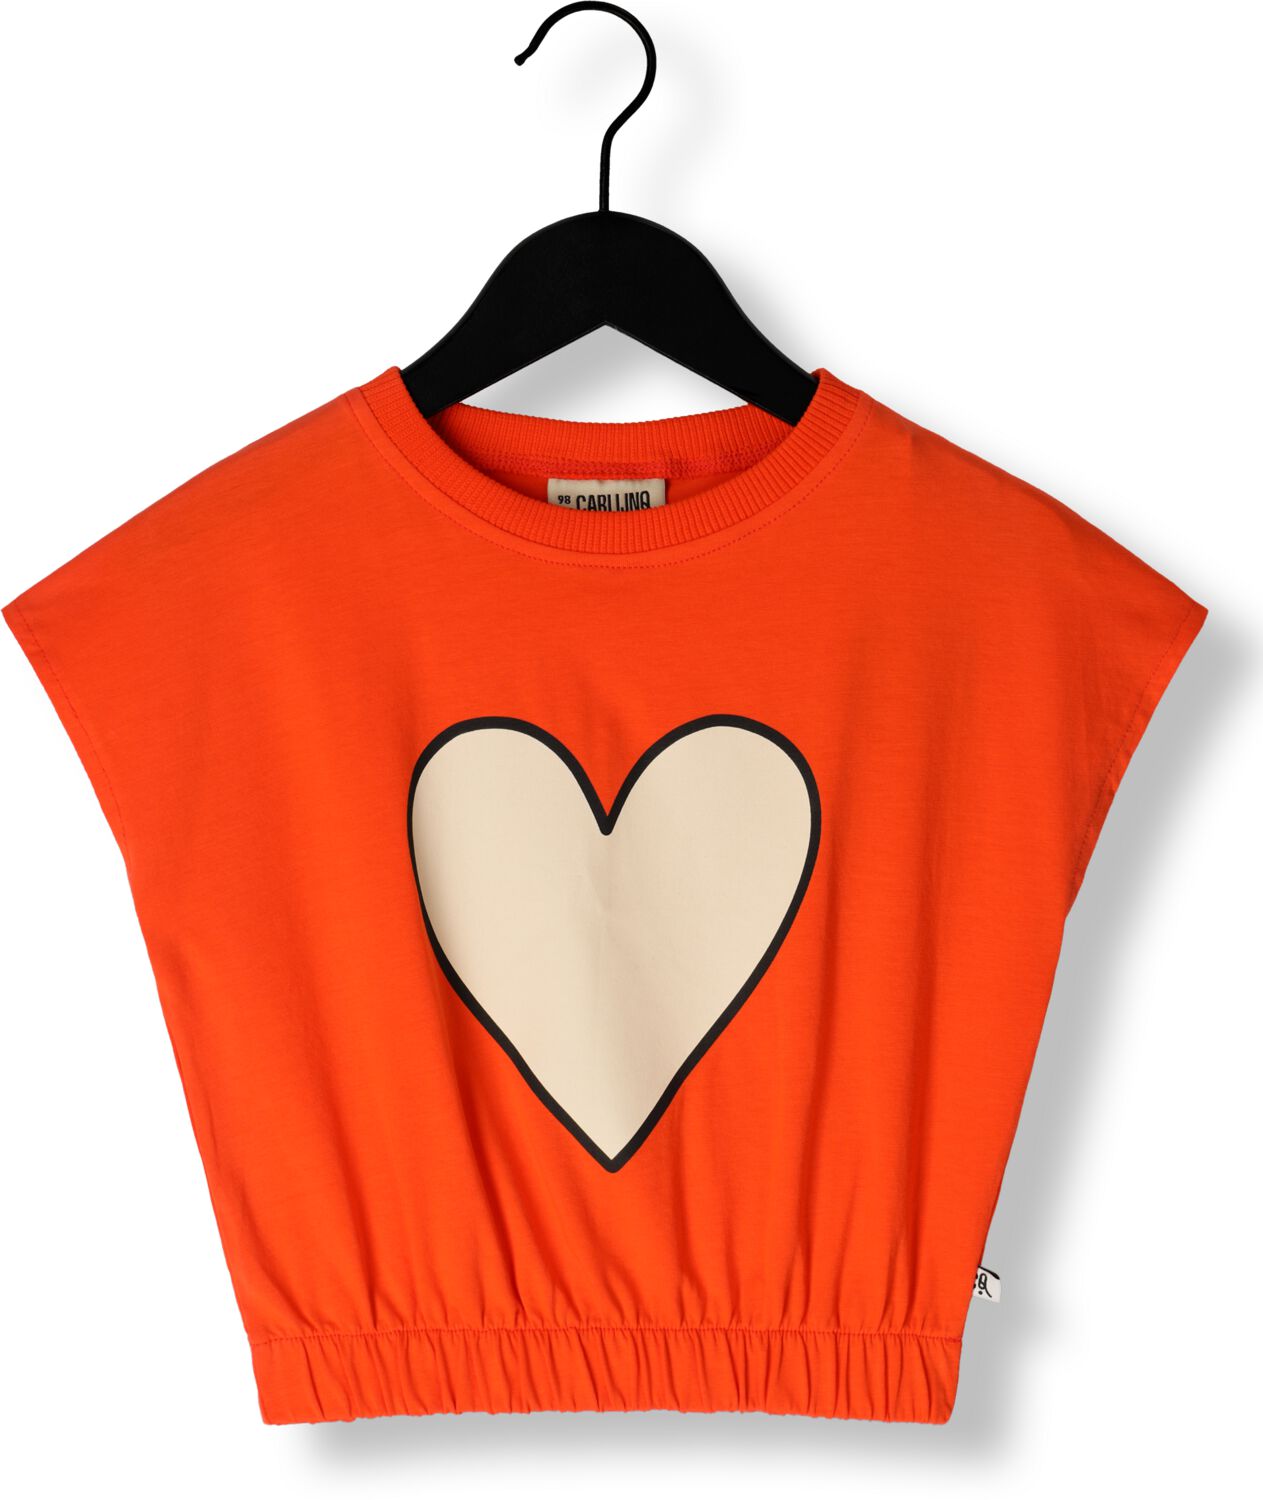 CARLIJNQ Meisjes Tops & T-shirts Basic Balloon Top With Print Rood